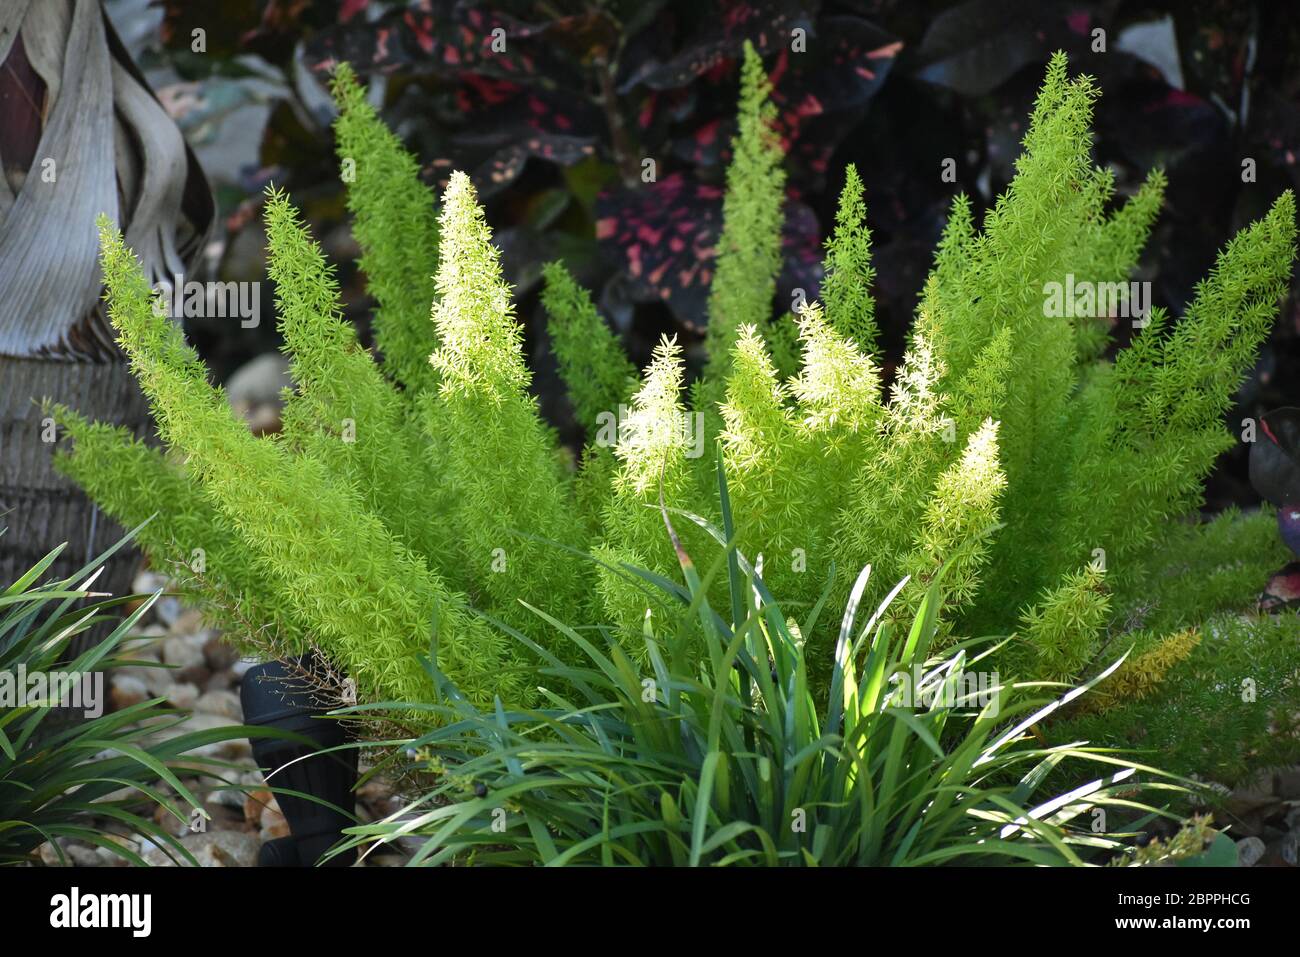 Foxtail fern glowing in the sun in Florida Stock Photo